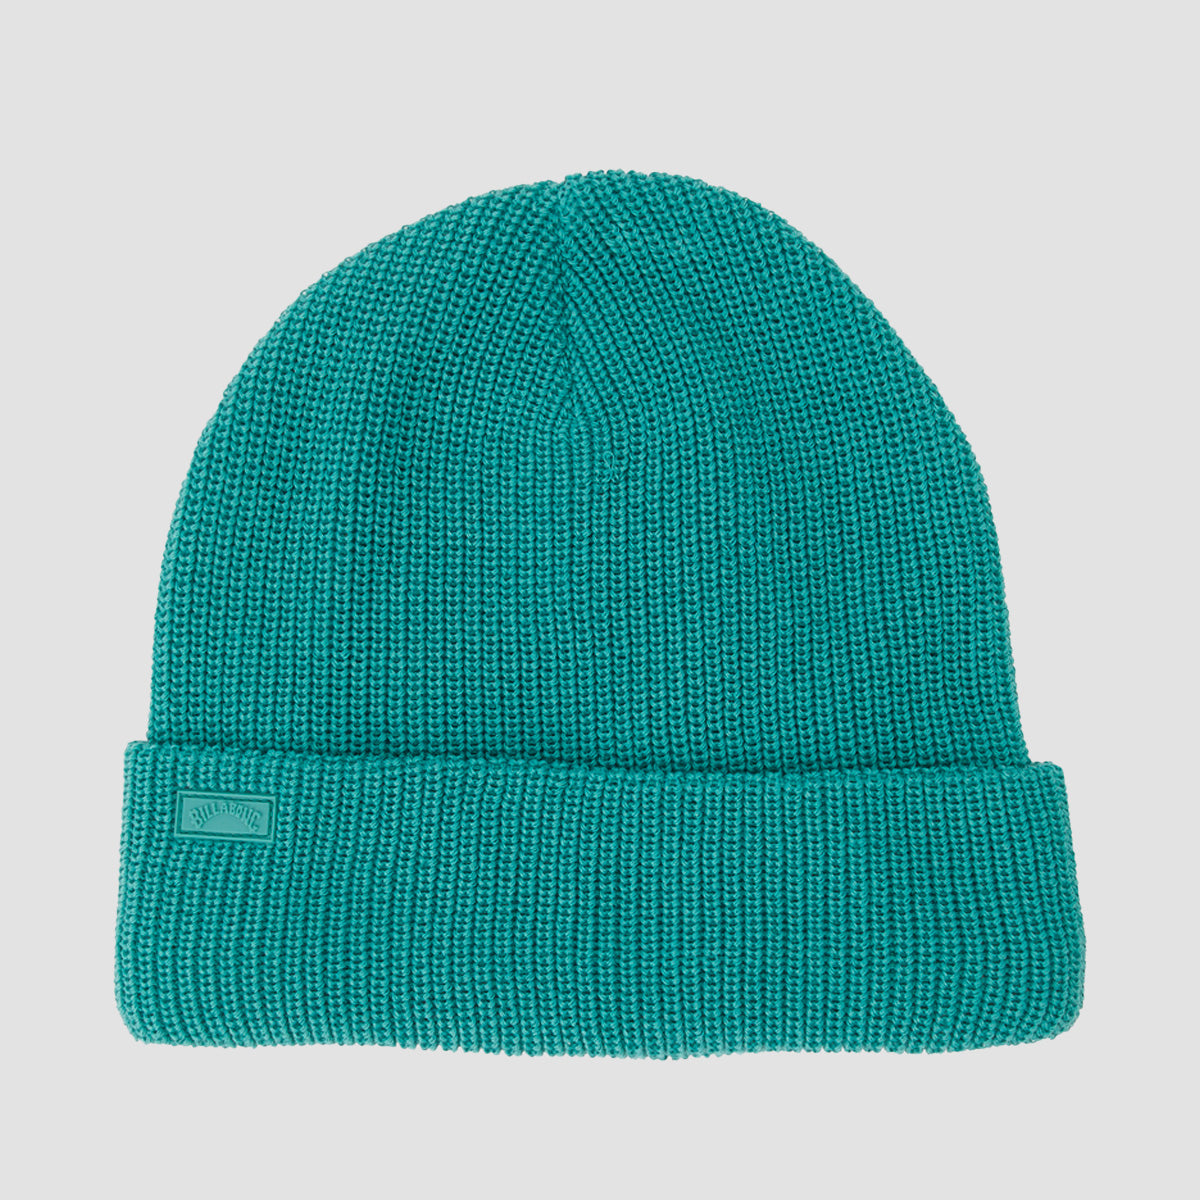 Accessories – Page 21 | Beanies